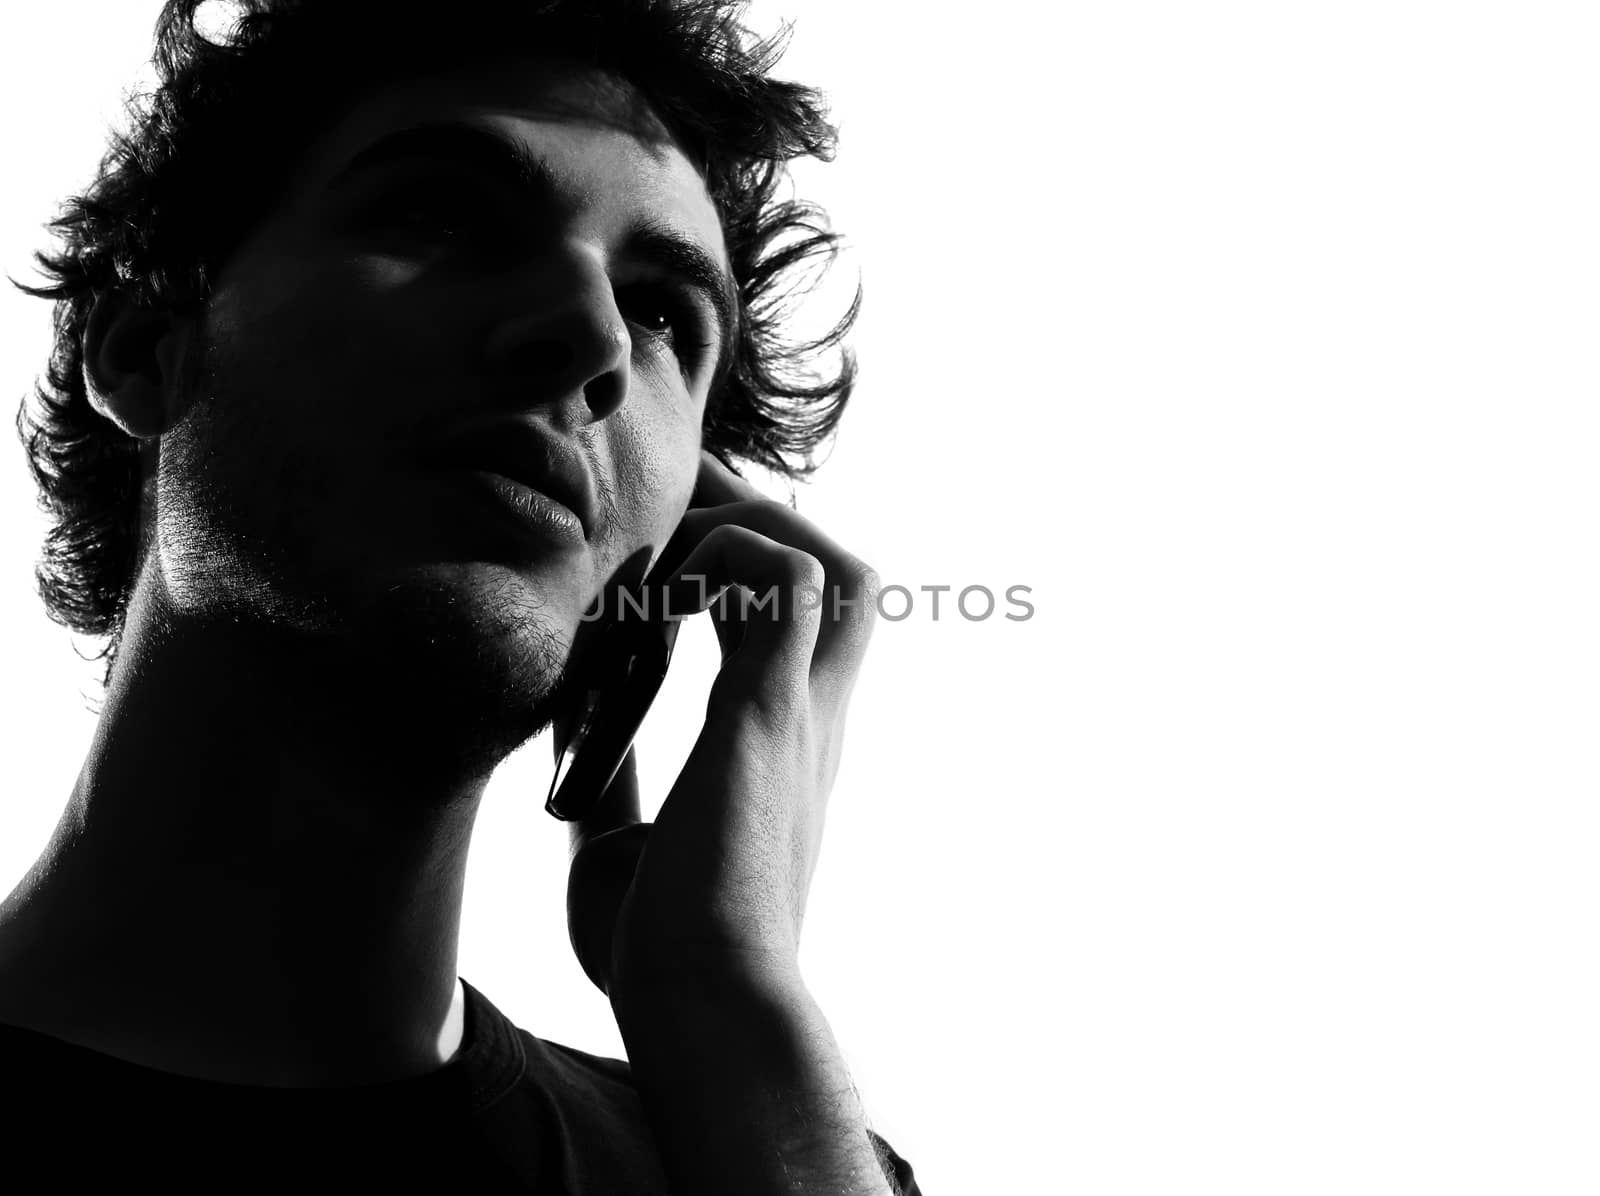 young man looking up telephone smiling portrait silhouette in studio isolated on white background